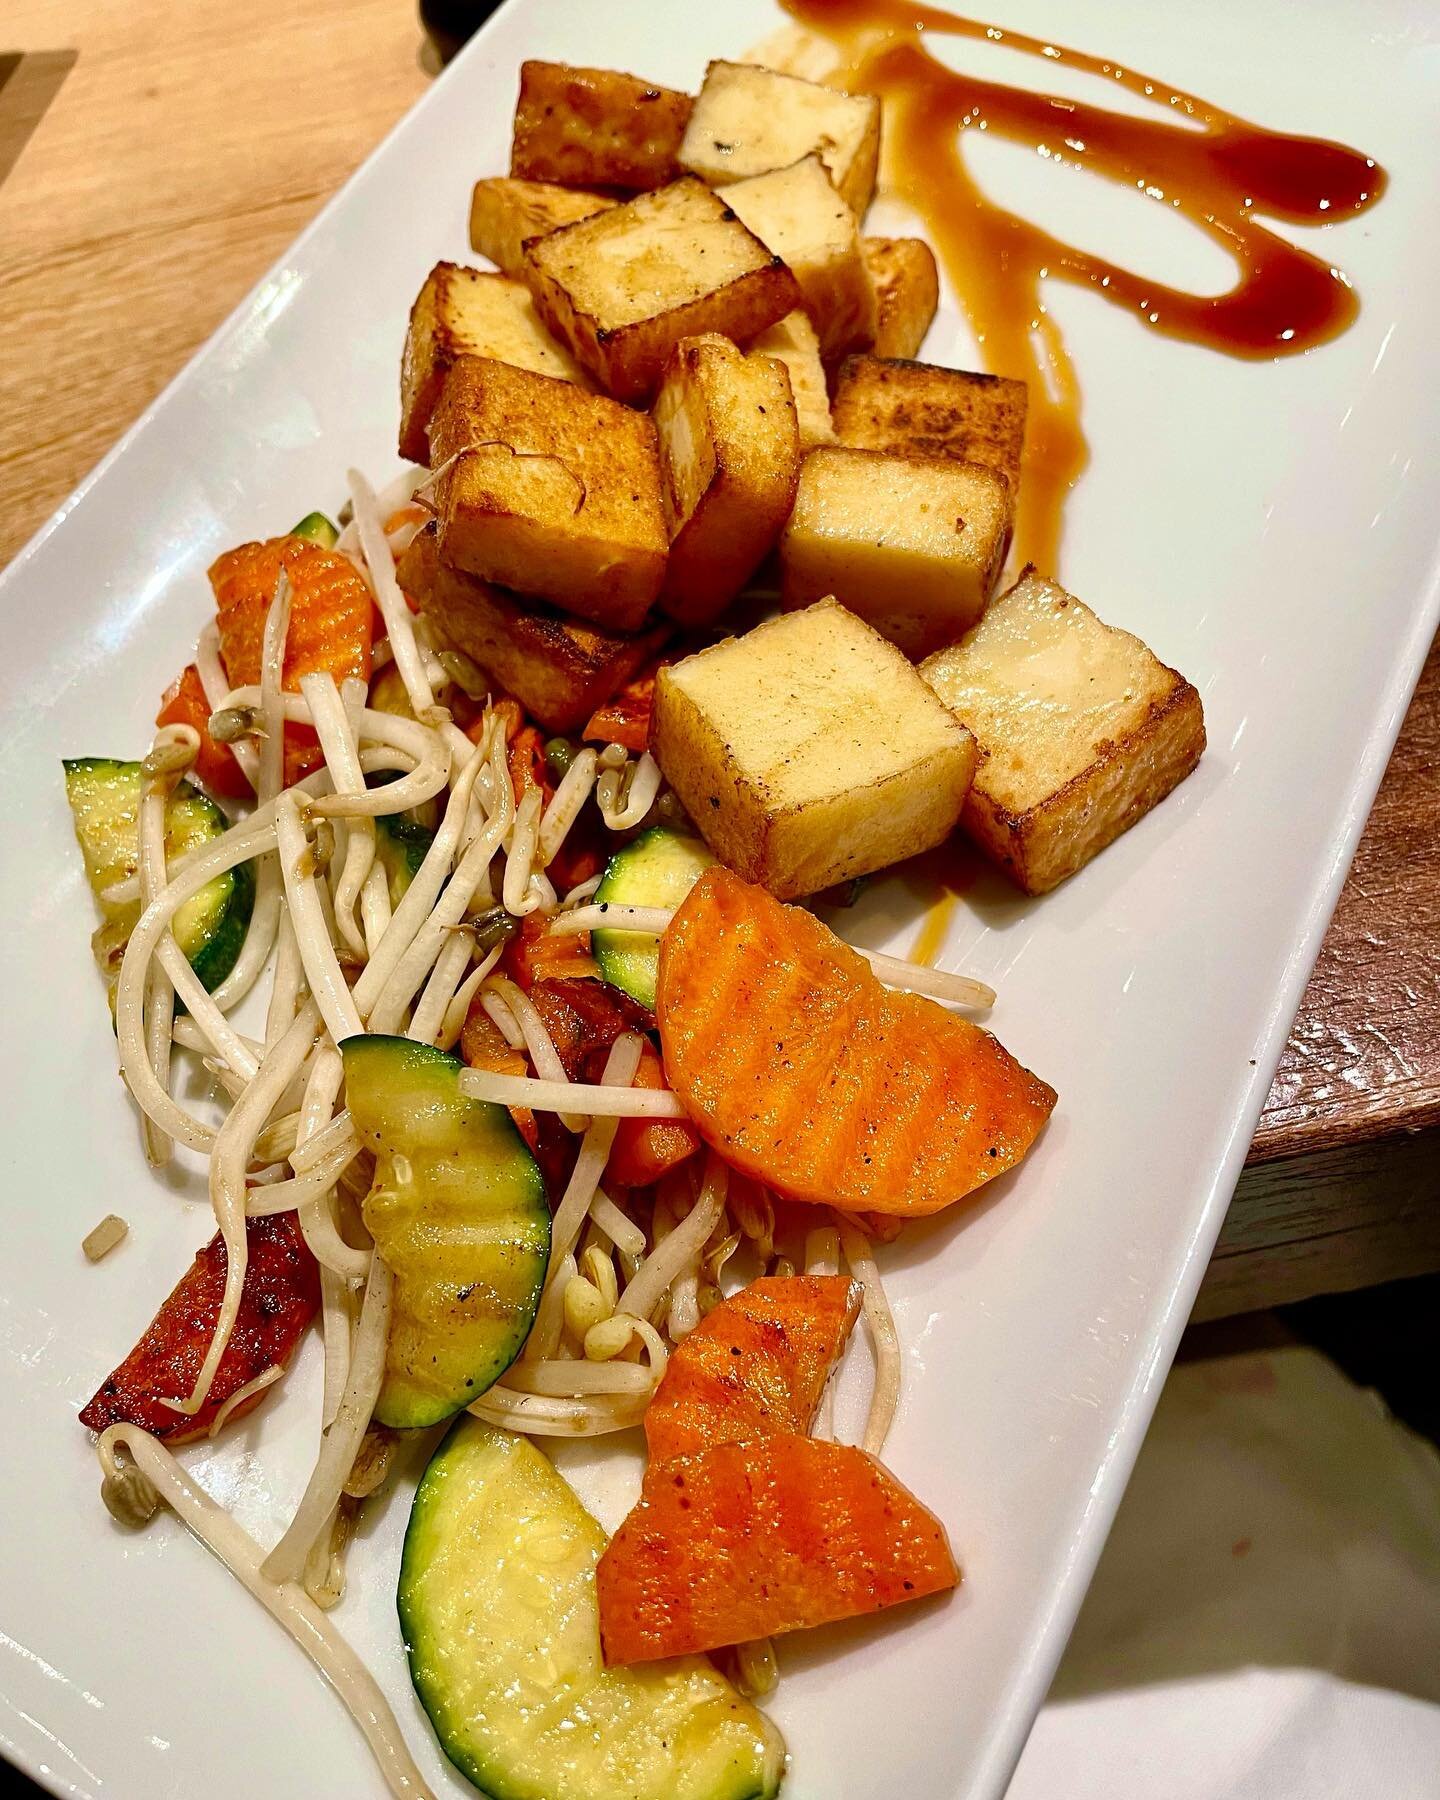 Yummy hibachi tofu &amp; crunchy veggies! Simple, clean and delish.  This resto is one of my favorites in @zermatt.matterhorn. Check them out if you visit this magical, winter wonderland.